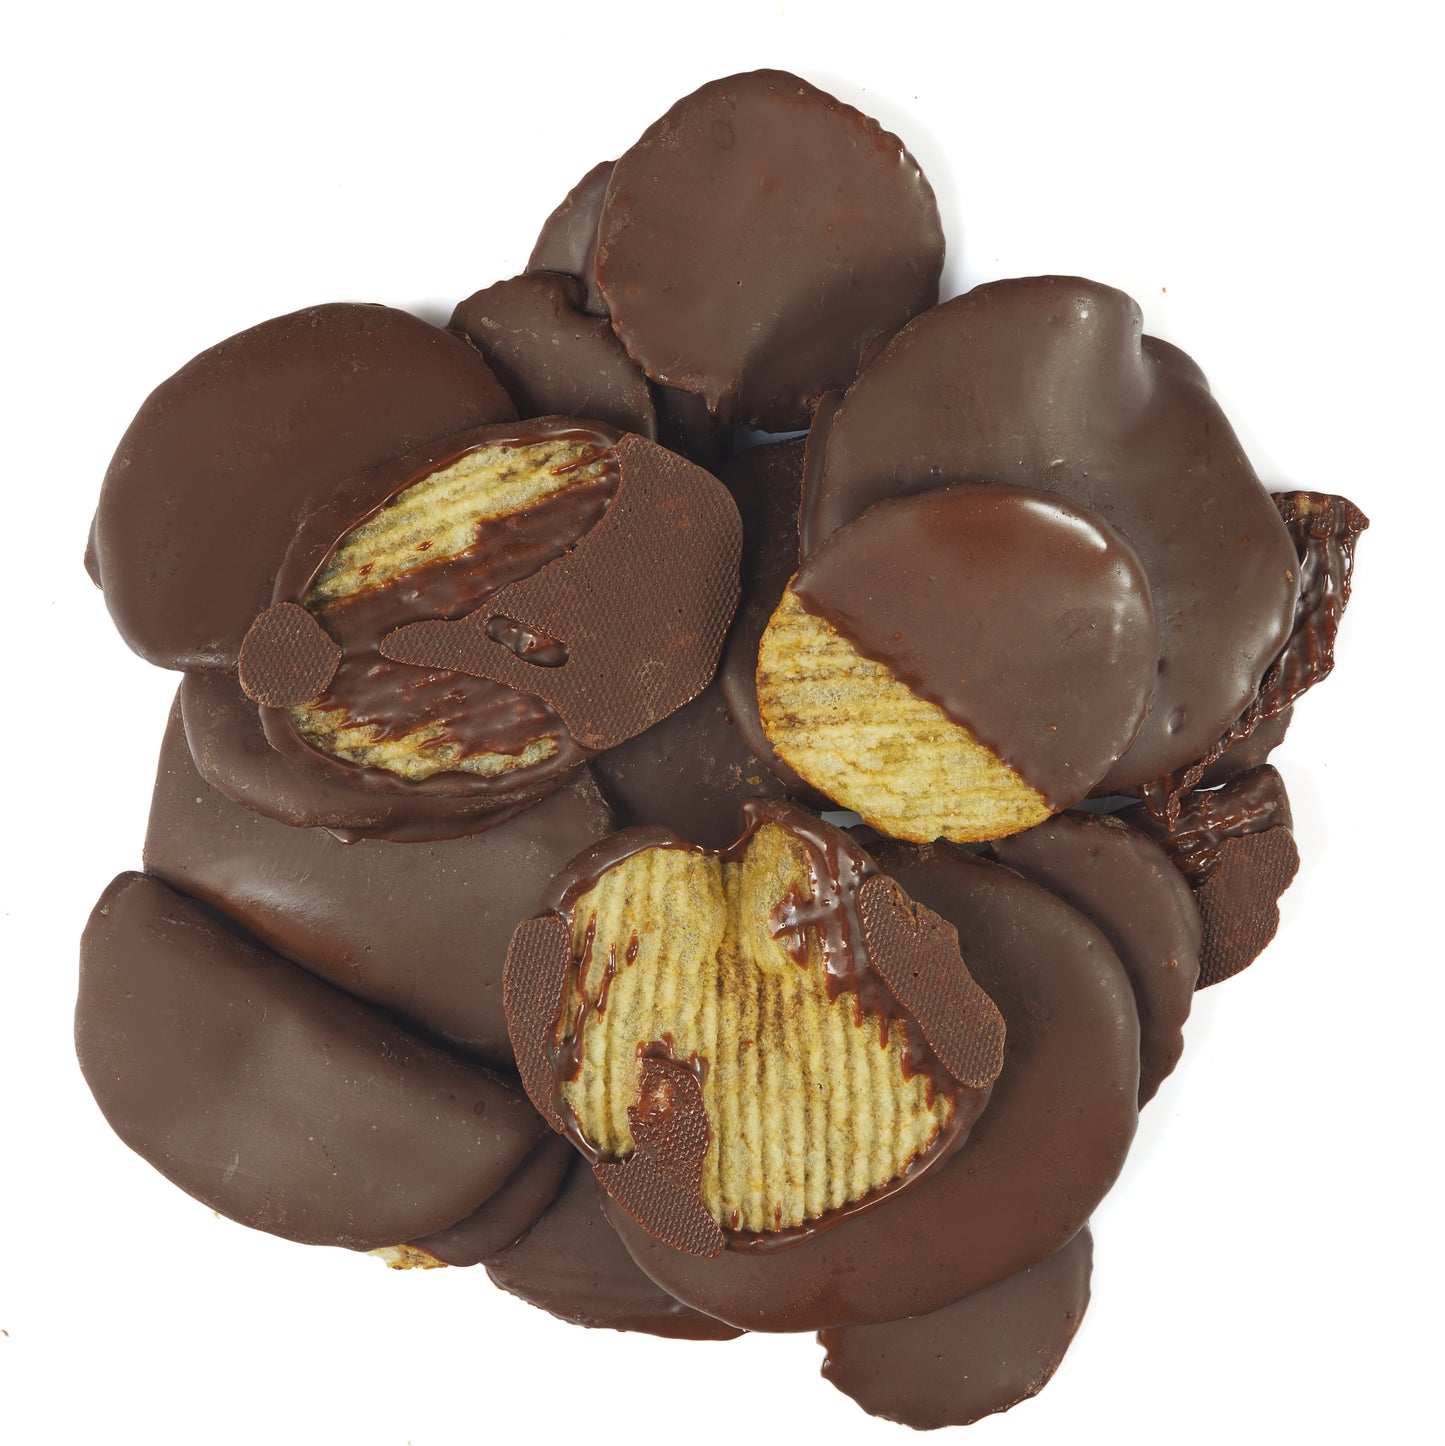 Chocolate Covered Potato Chips | Kosher for Passover